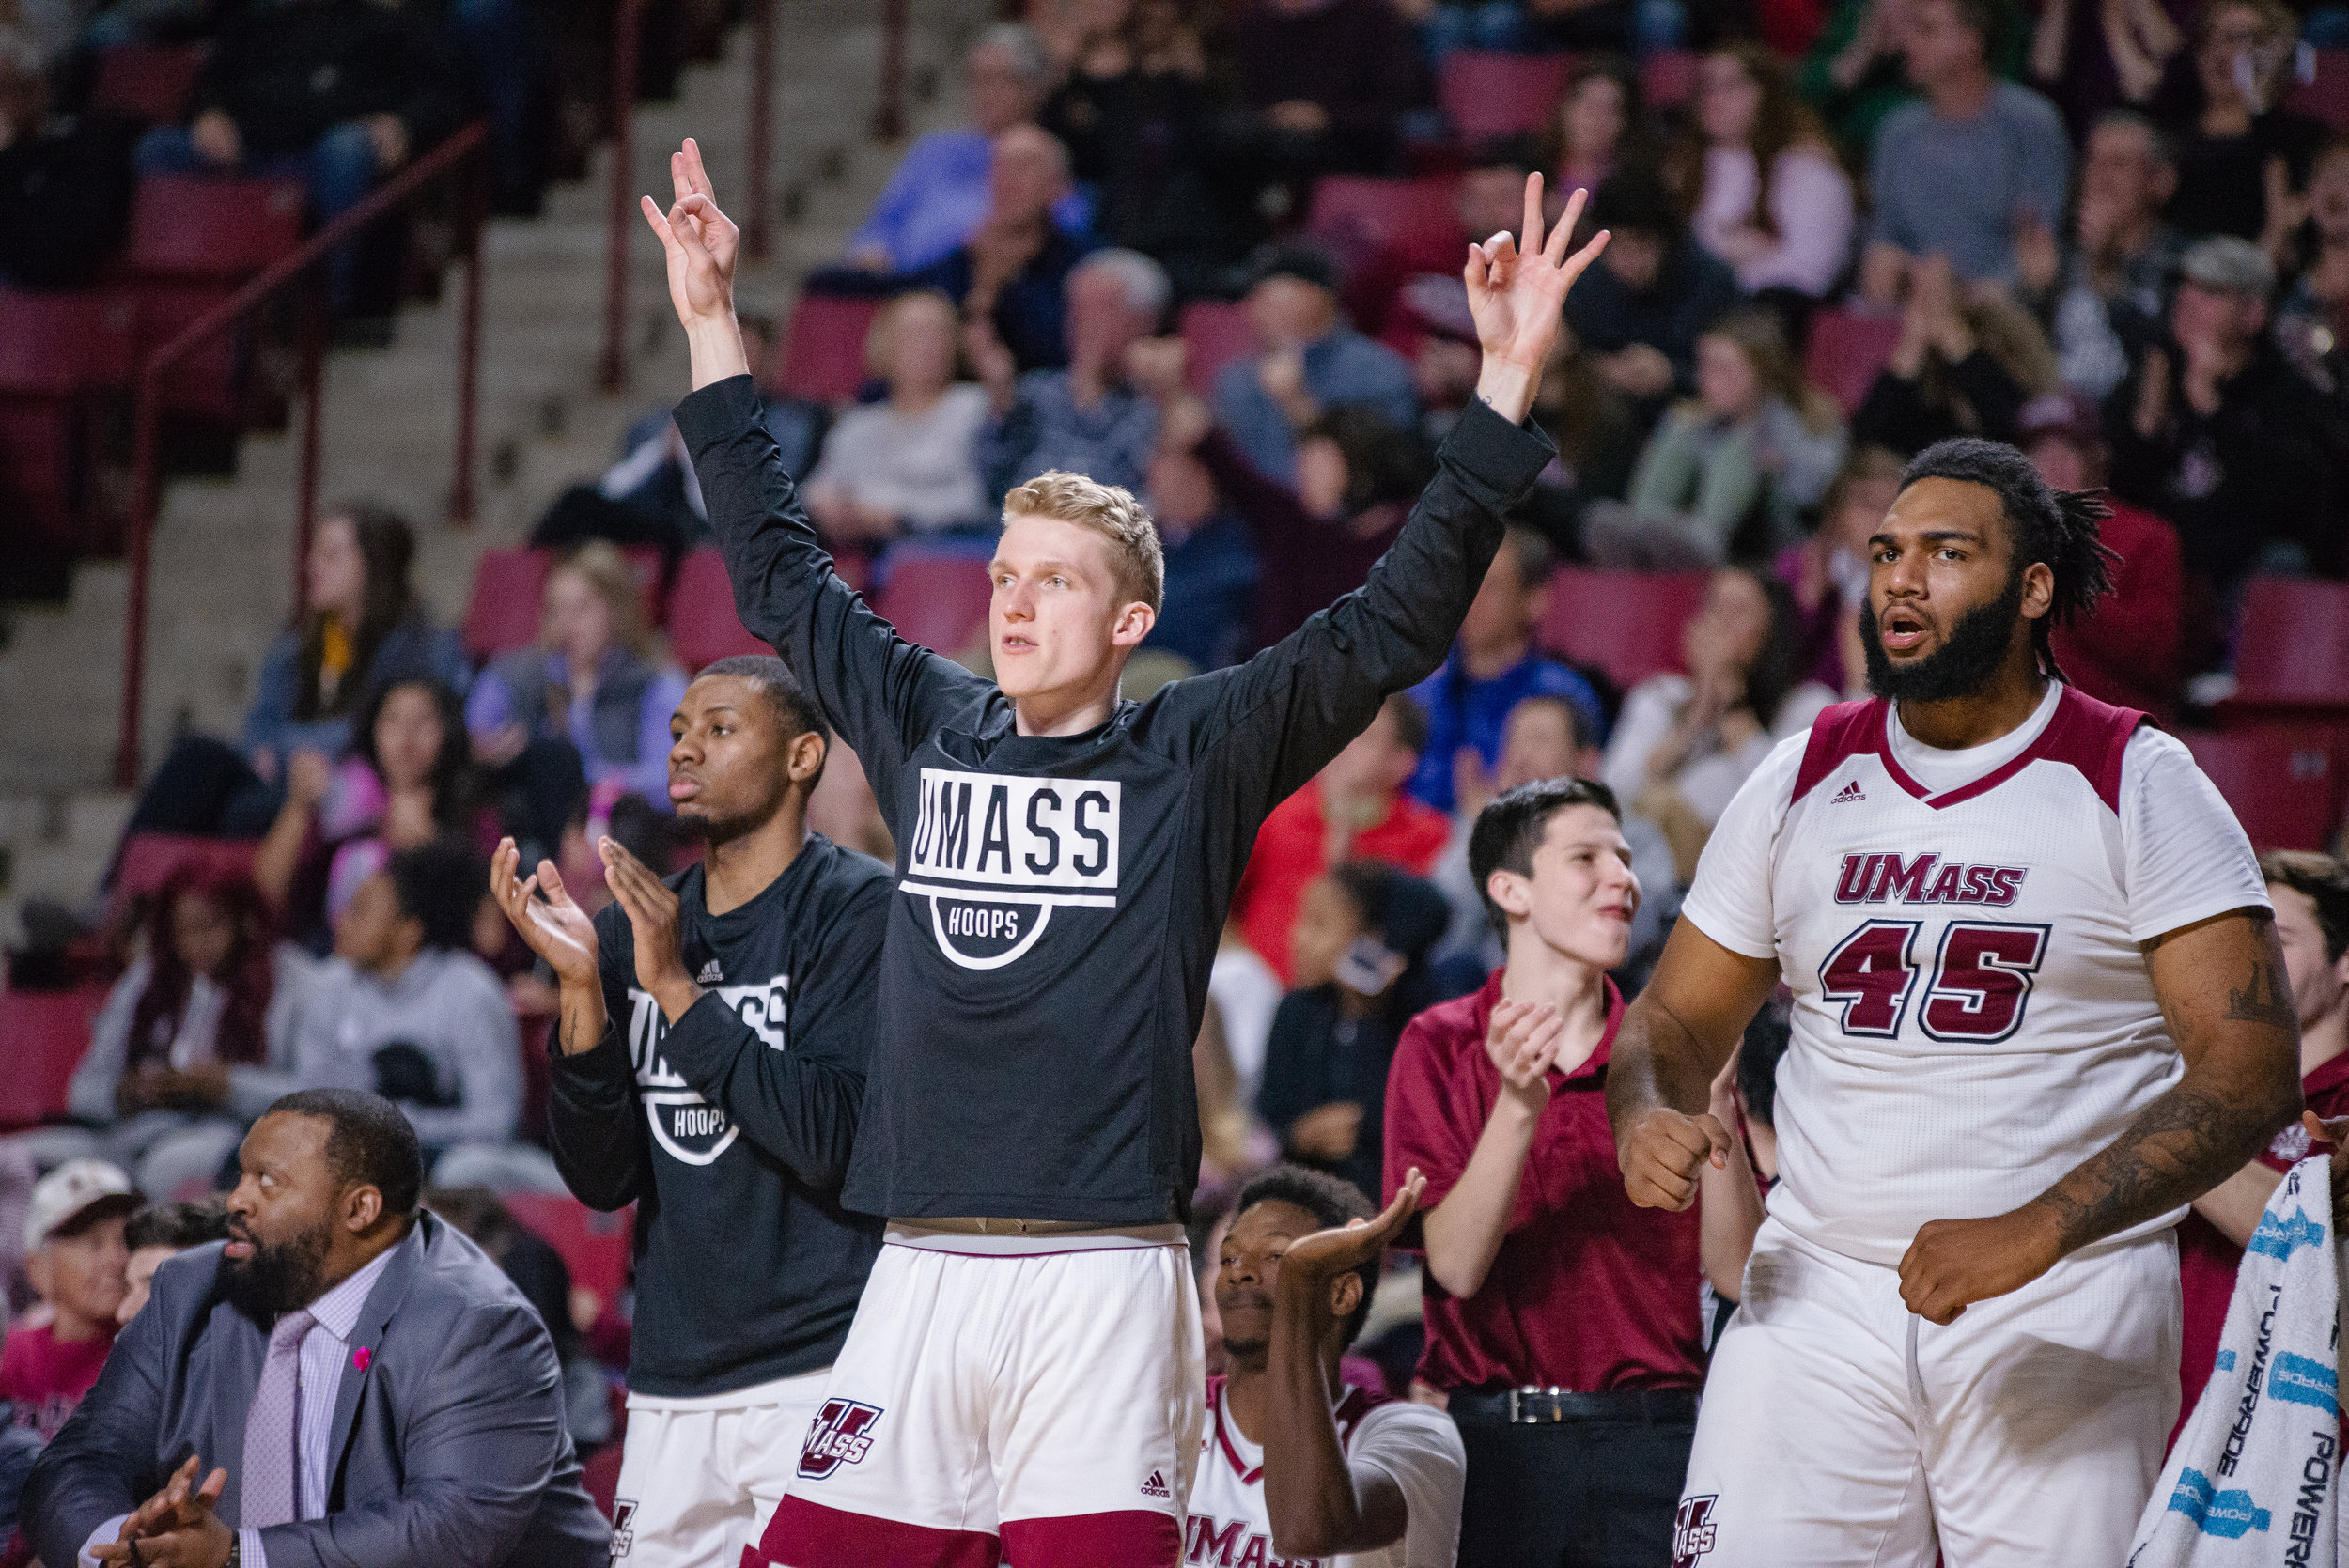  UMass Men's Basketball gets first conference win against URI at the Mullins Center on Sunday Jan. 27, 2019.  (Photo by Judith Gibson-Okunieff) 